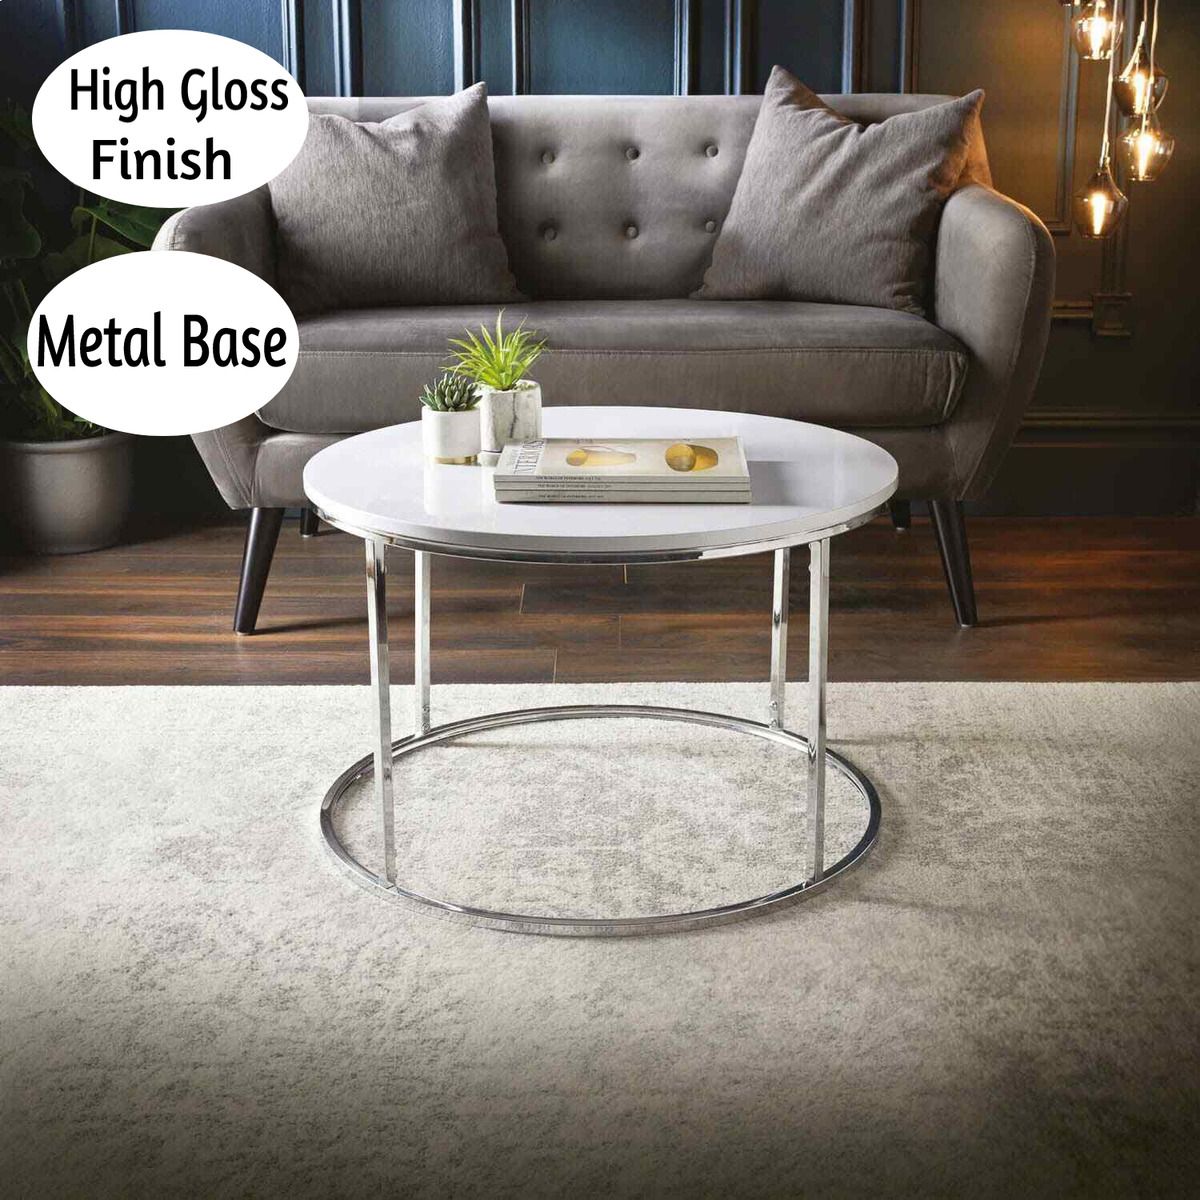 Round Coffee Table Living Room Sofa Center Side End High Gloss With Metal  Frame | Ebay Intended For Glossy Finished Metal Coffee Tables (View 3 of 15)